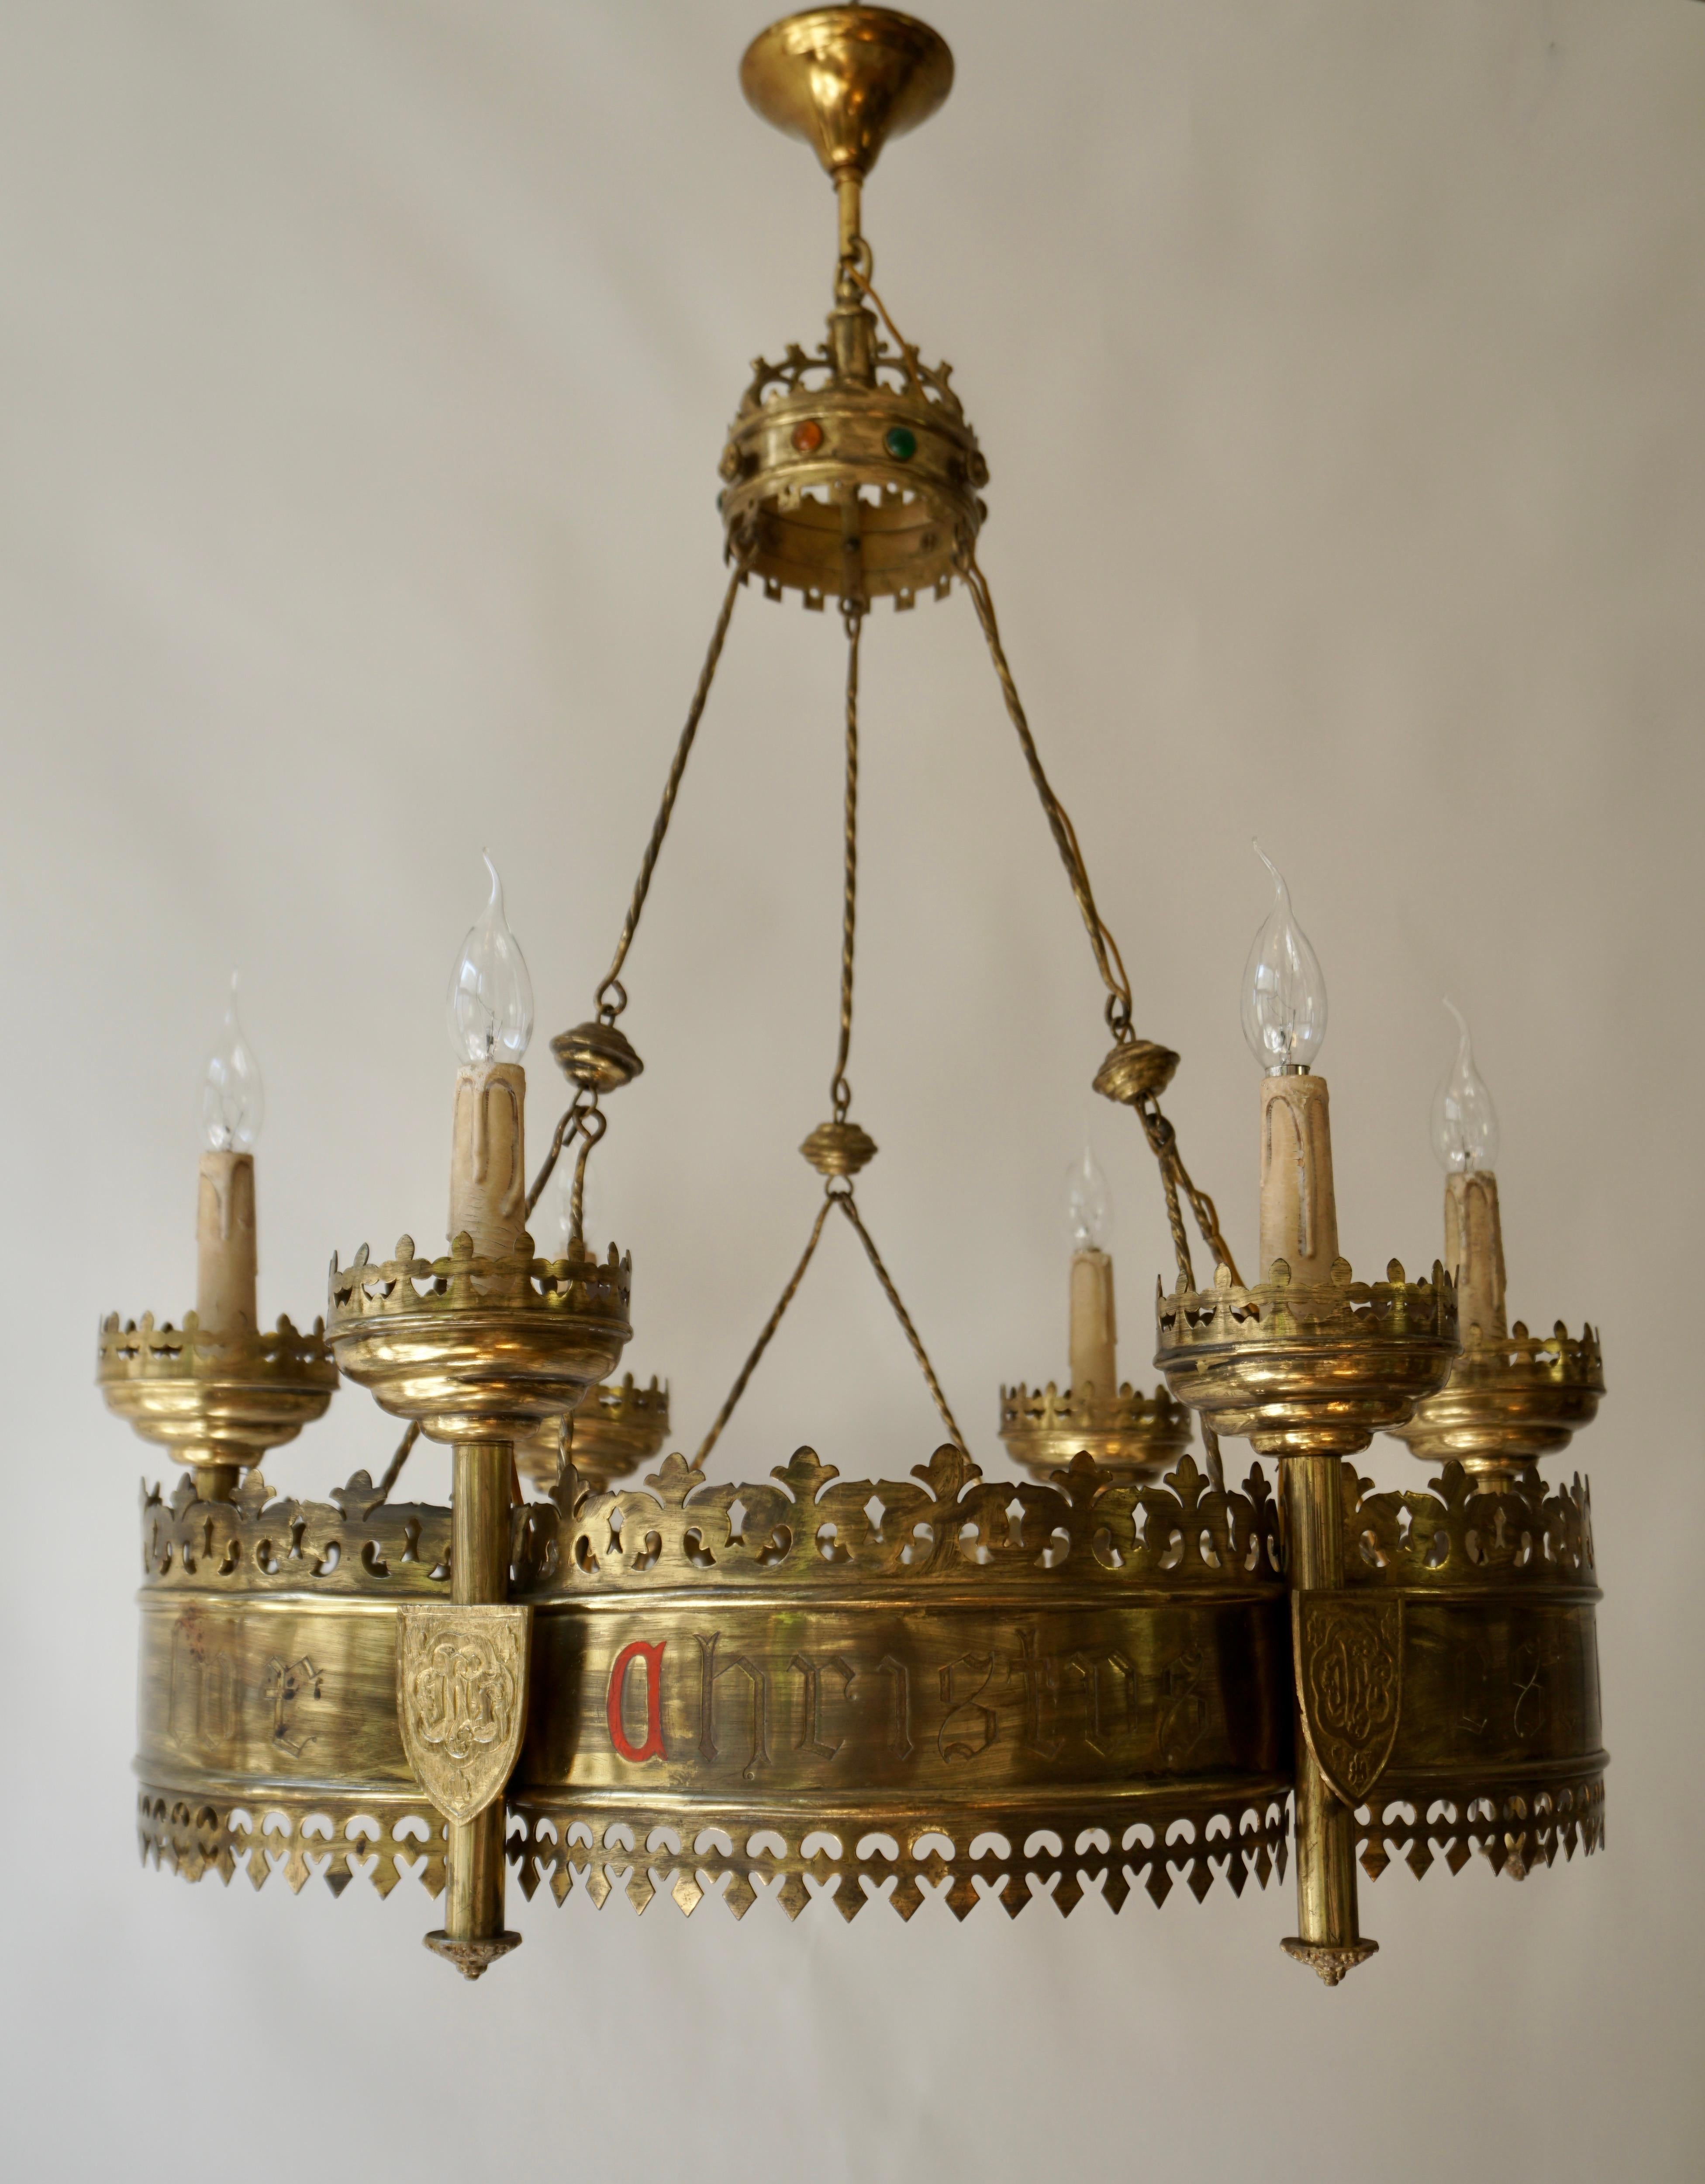 Beautiful and meaningful church relic chandelier from the late 1800s.  

This stunning and all handcrafted candle chandelier from the 1880s is designed in the shape of an advent wreath. On the outside of this Gothic chandelier are six shields with